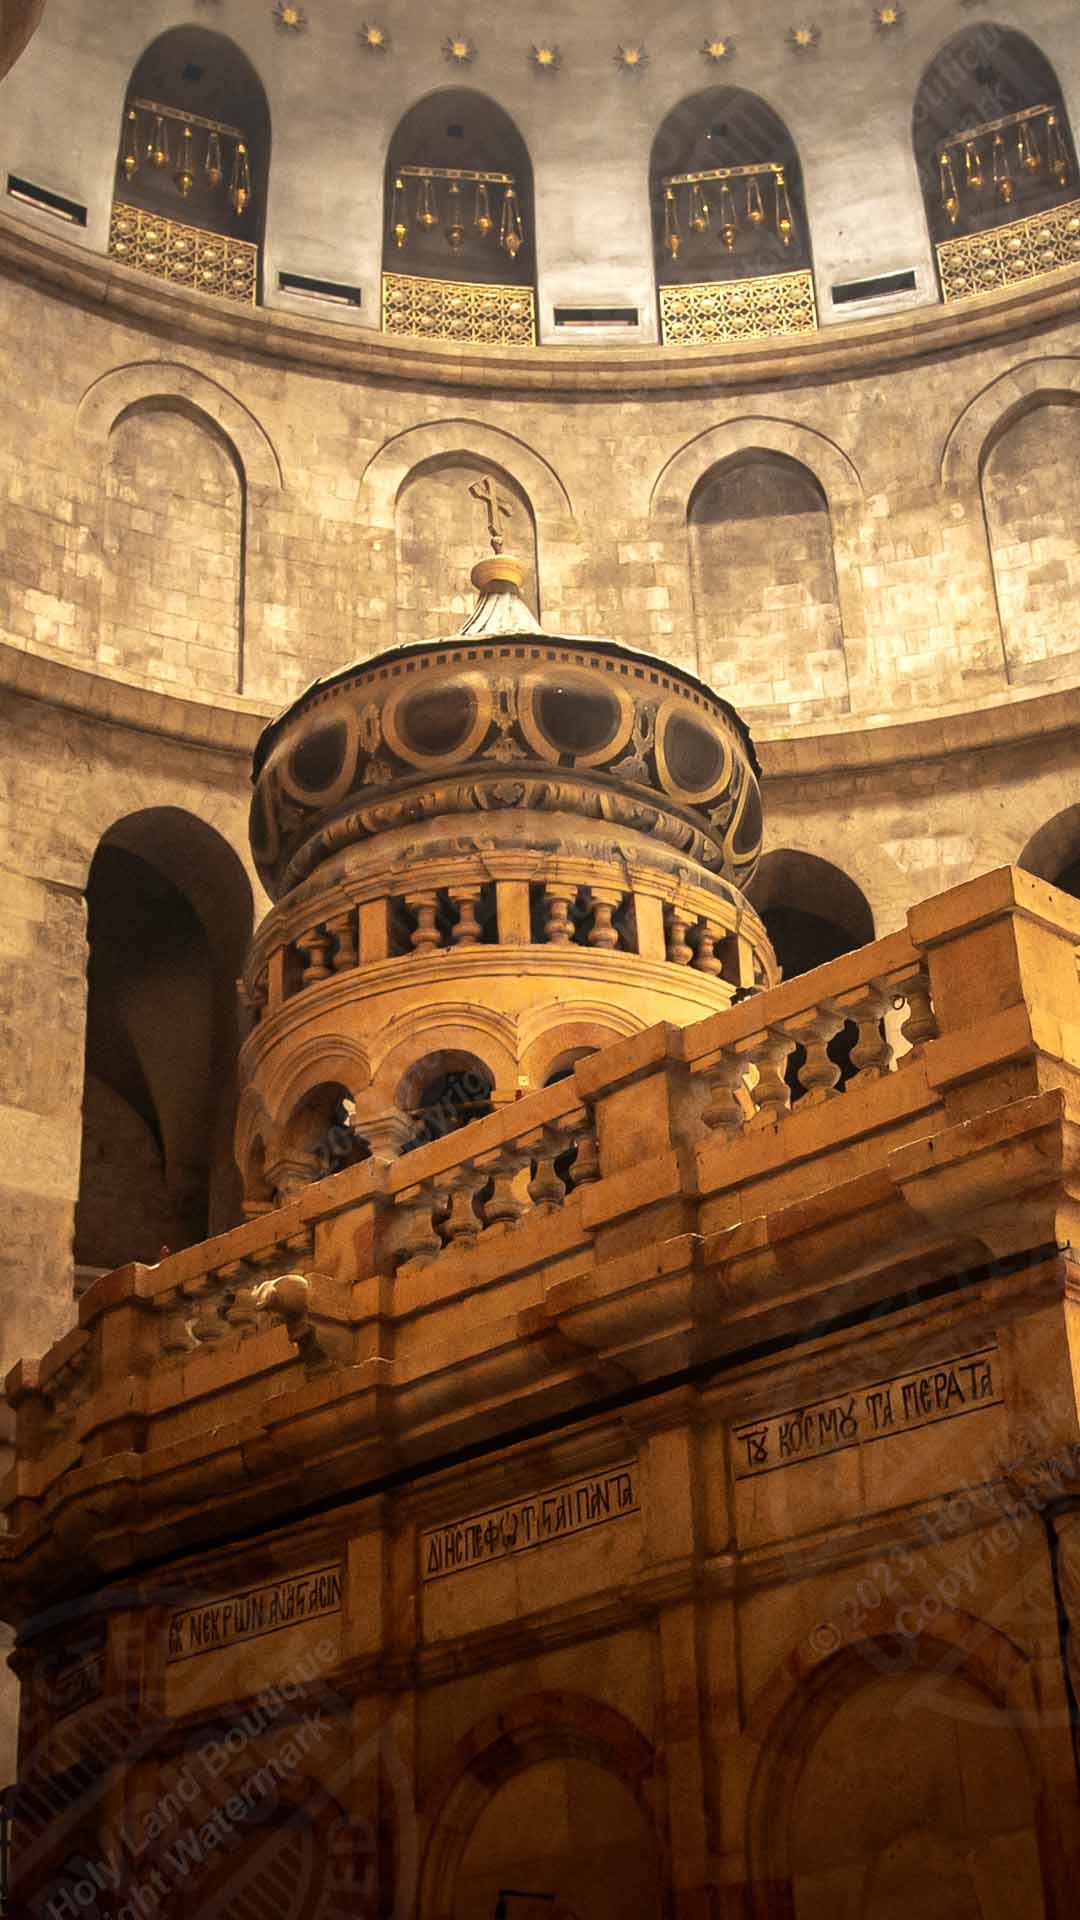 The Holy Sepulcher Tomb